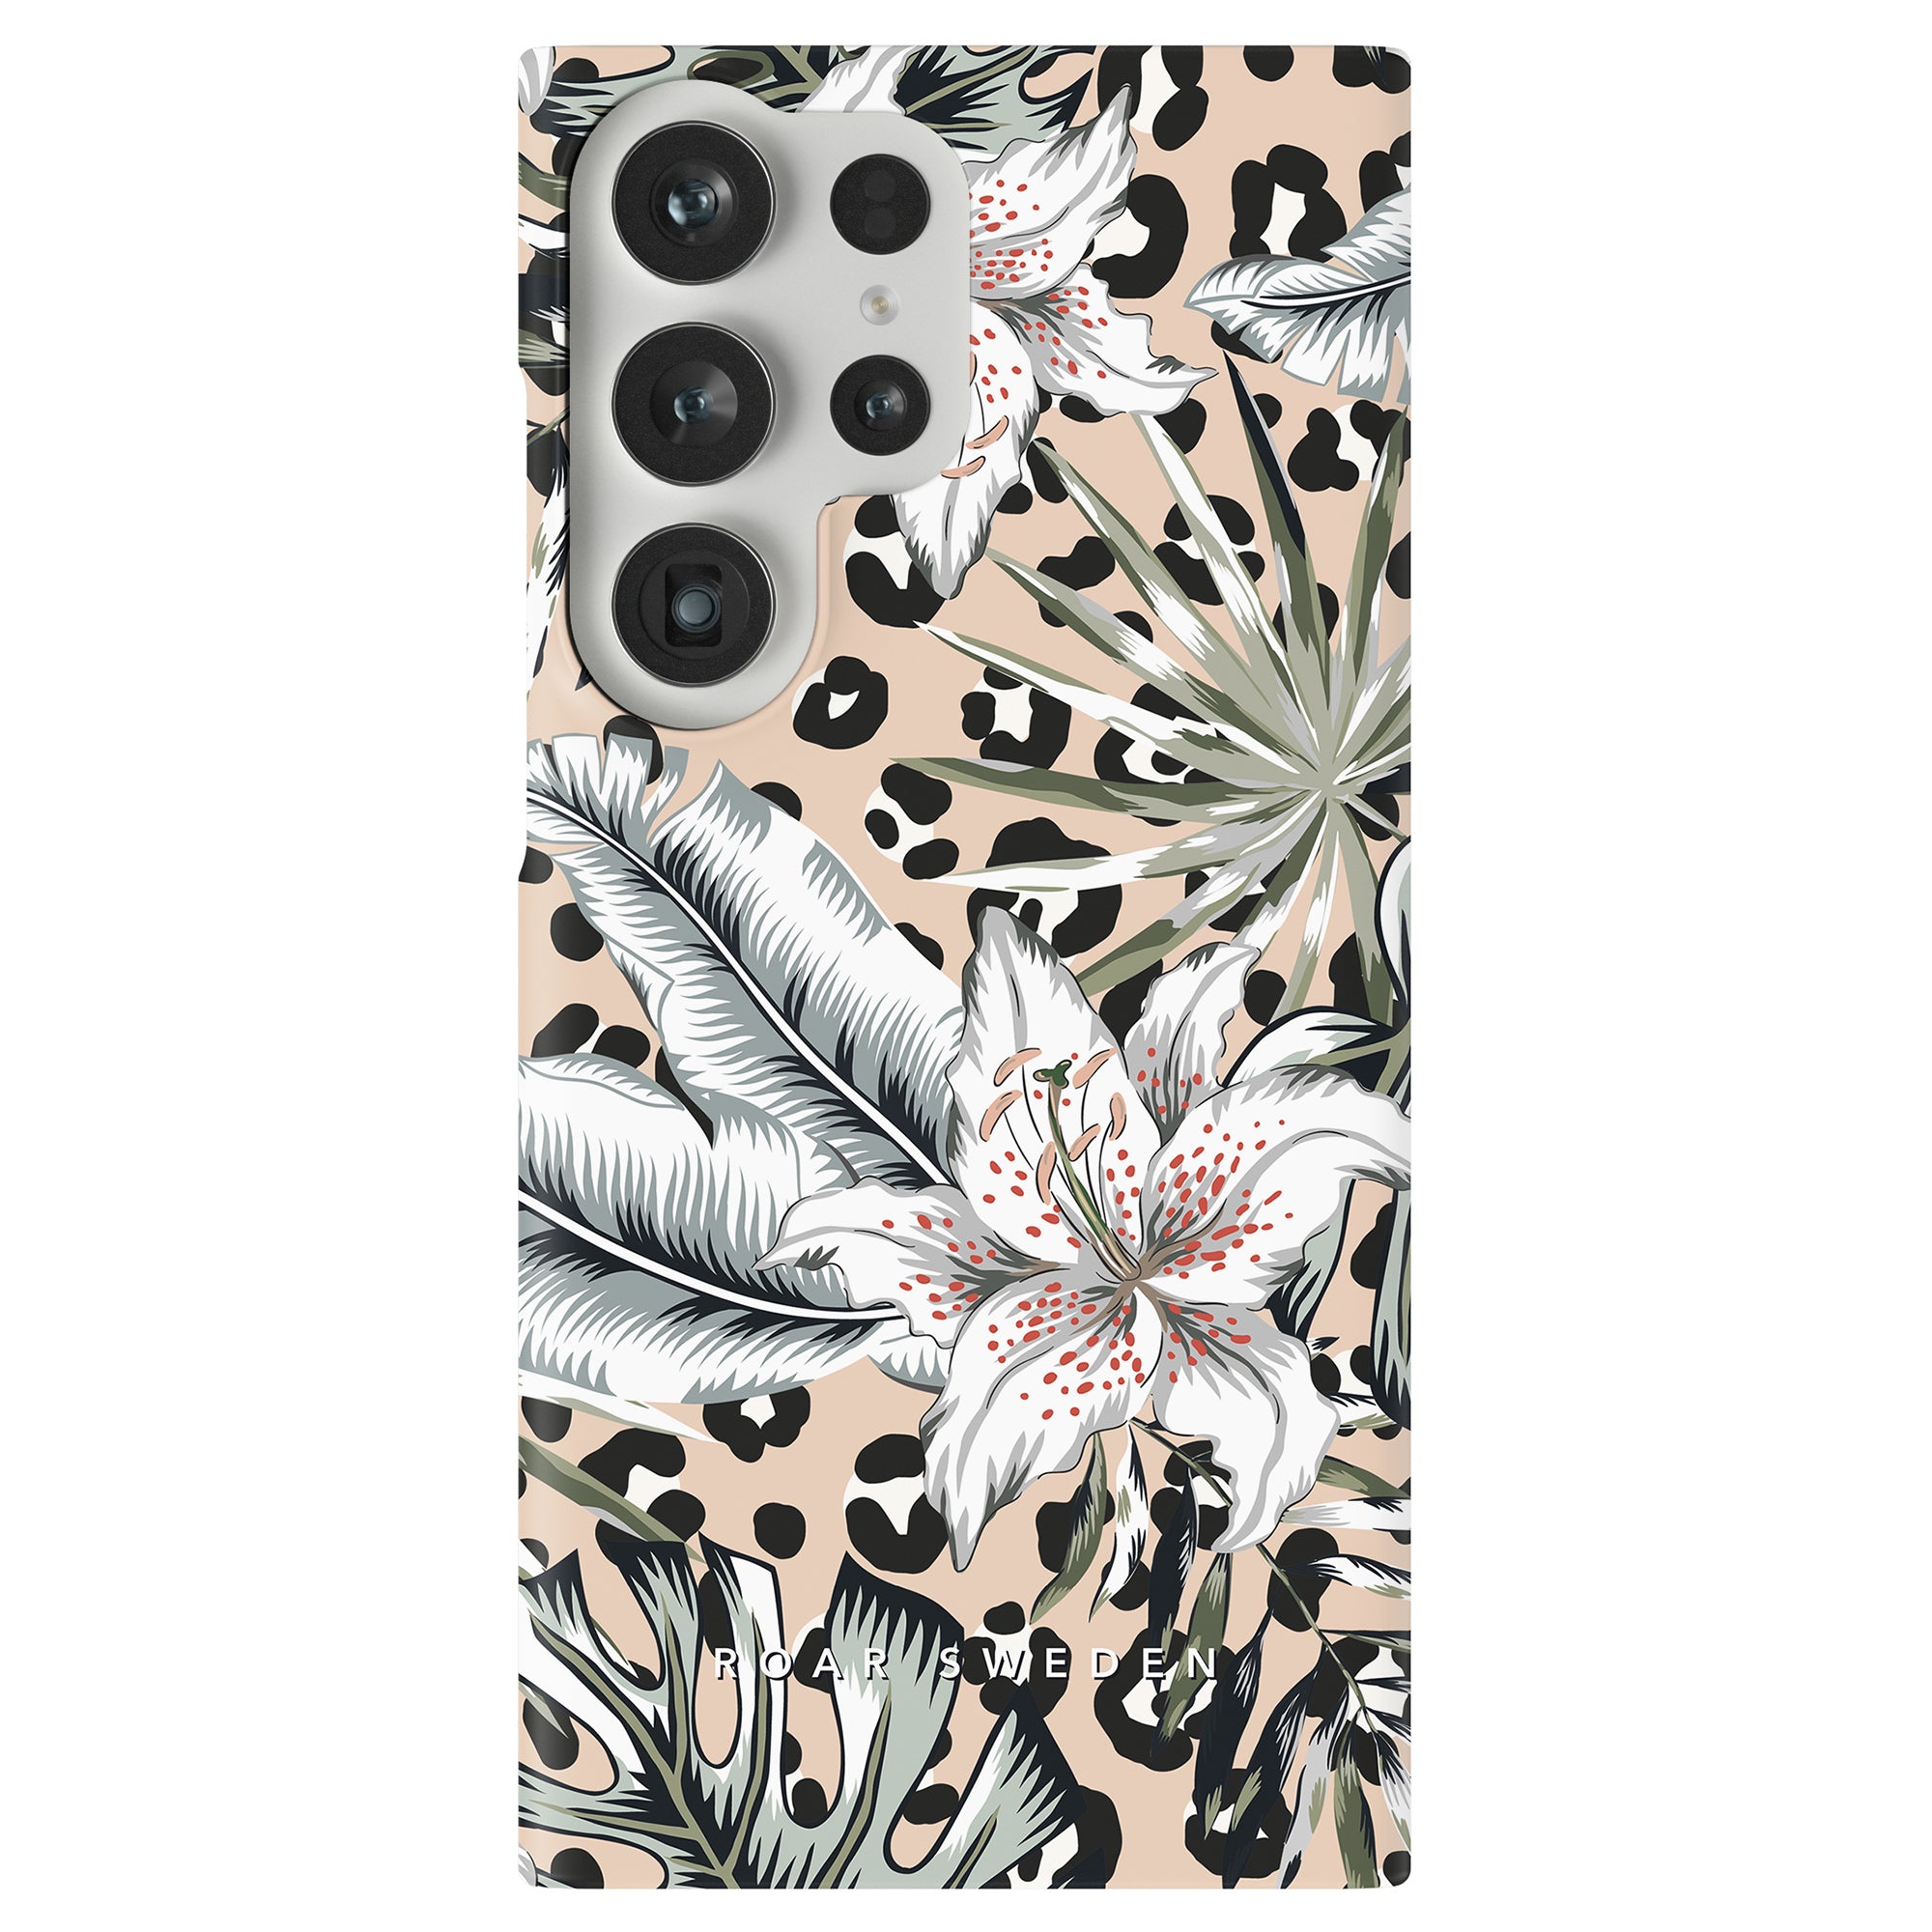 Introducing our stylish leopard print Senna - Slim case, exclusively designed for the Samsung Galaxy S9 and S9+. Add a touch of sophistication to your device with this trendy accessory. Perfectly blending fashion and functionality.